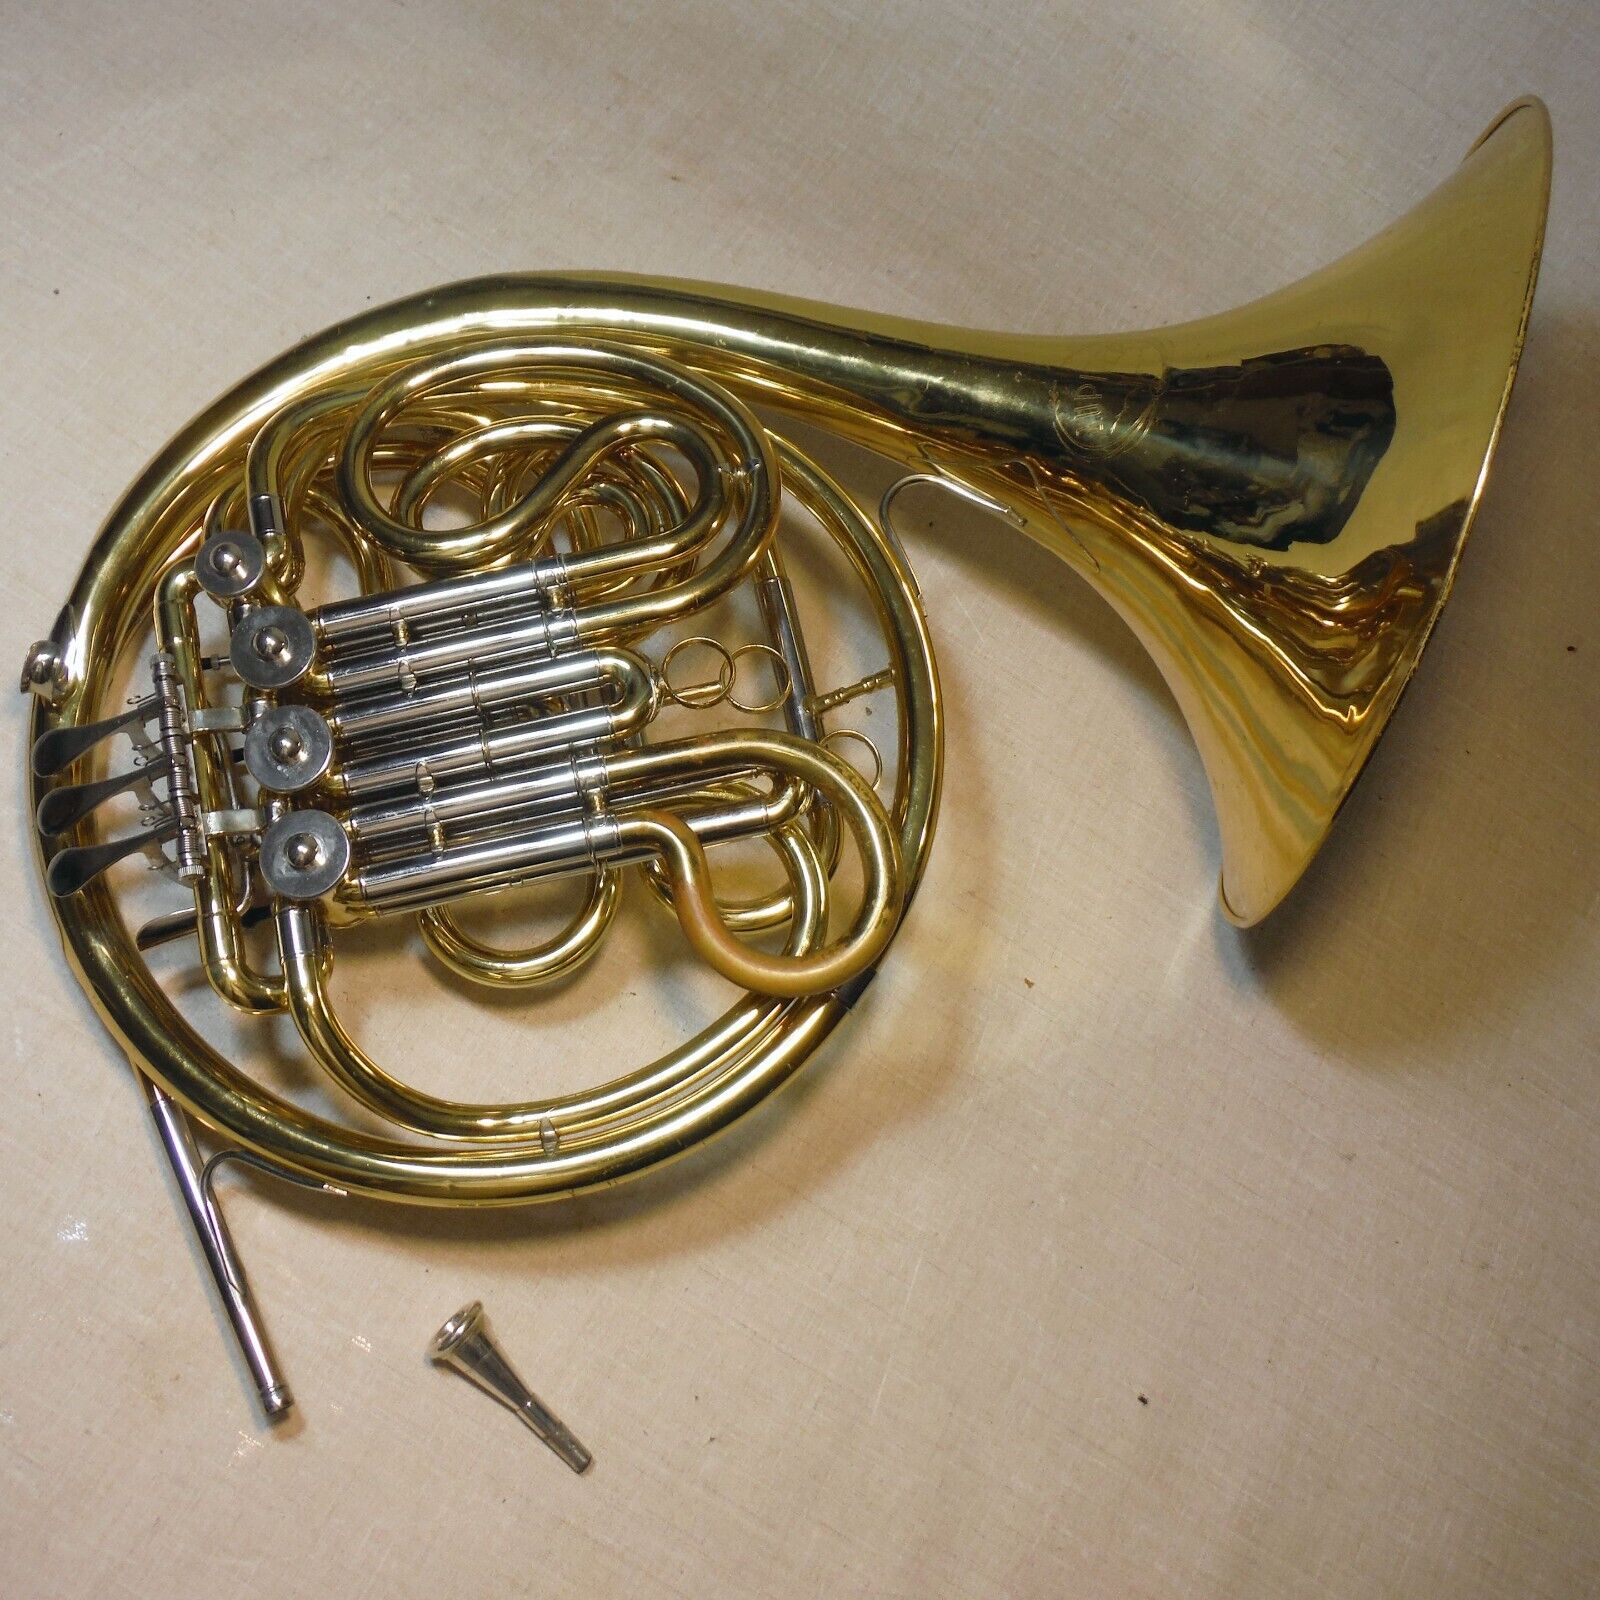 JUPITER JHR-852 DOUBLE FRENCH HORN BRASS WORKING GOOD W/DENTS CASE MOUTHPIECE 2